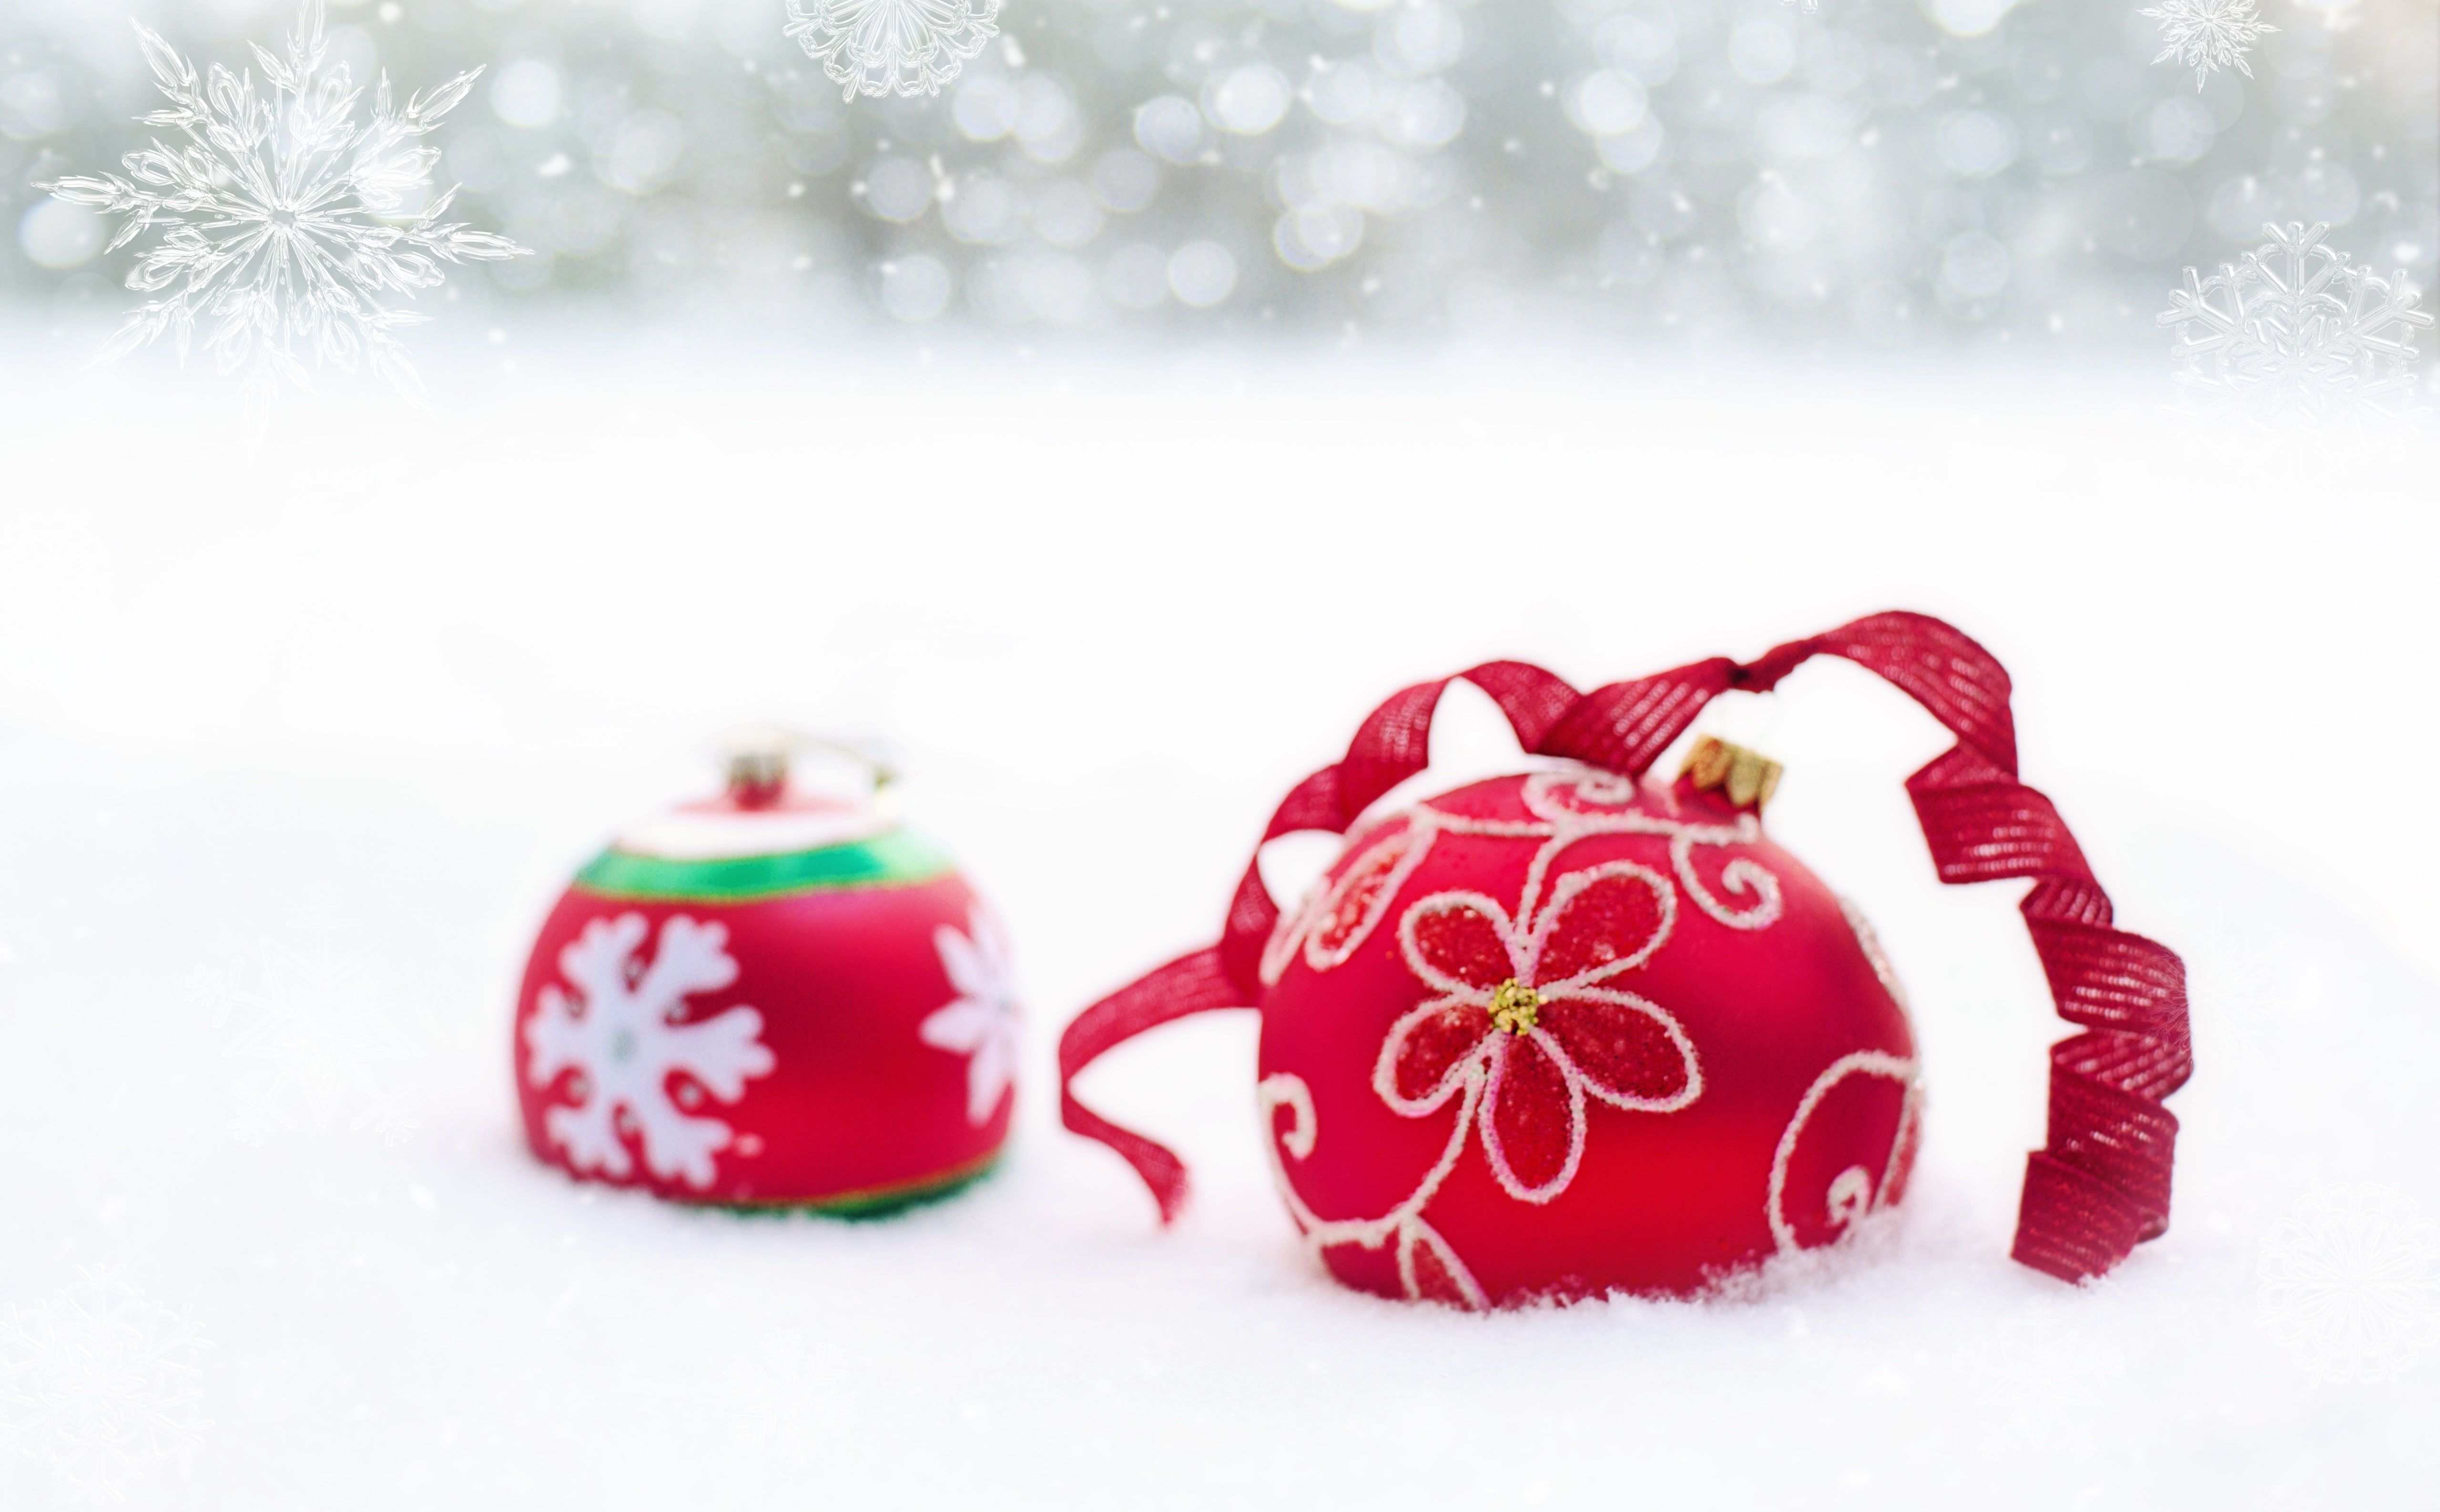 New Year Red Ornaments, Holidays, Beautiful, Winter, White, Amazing